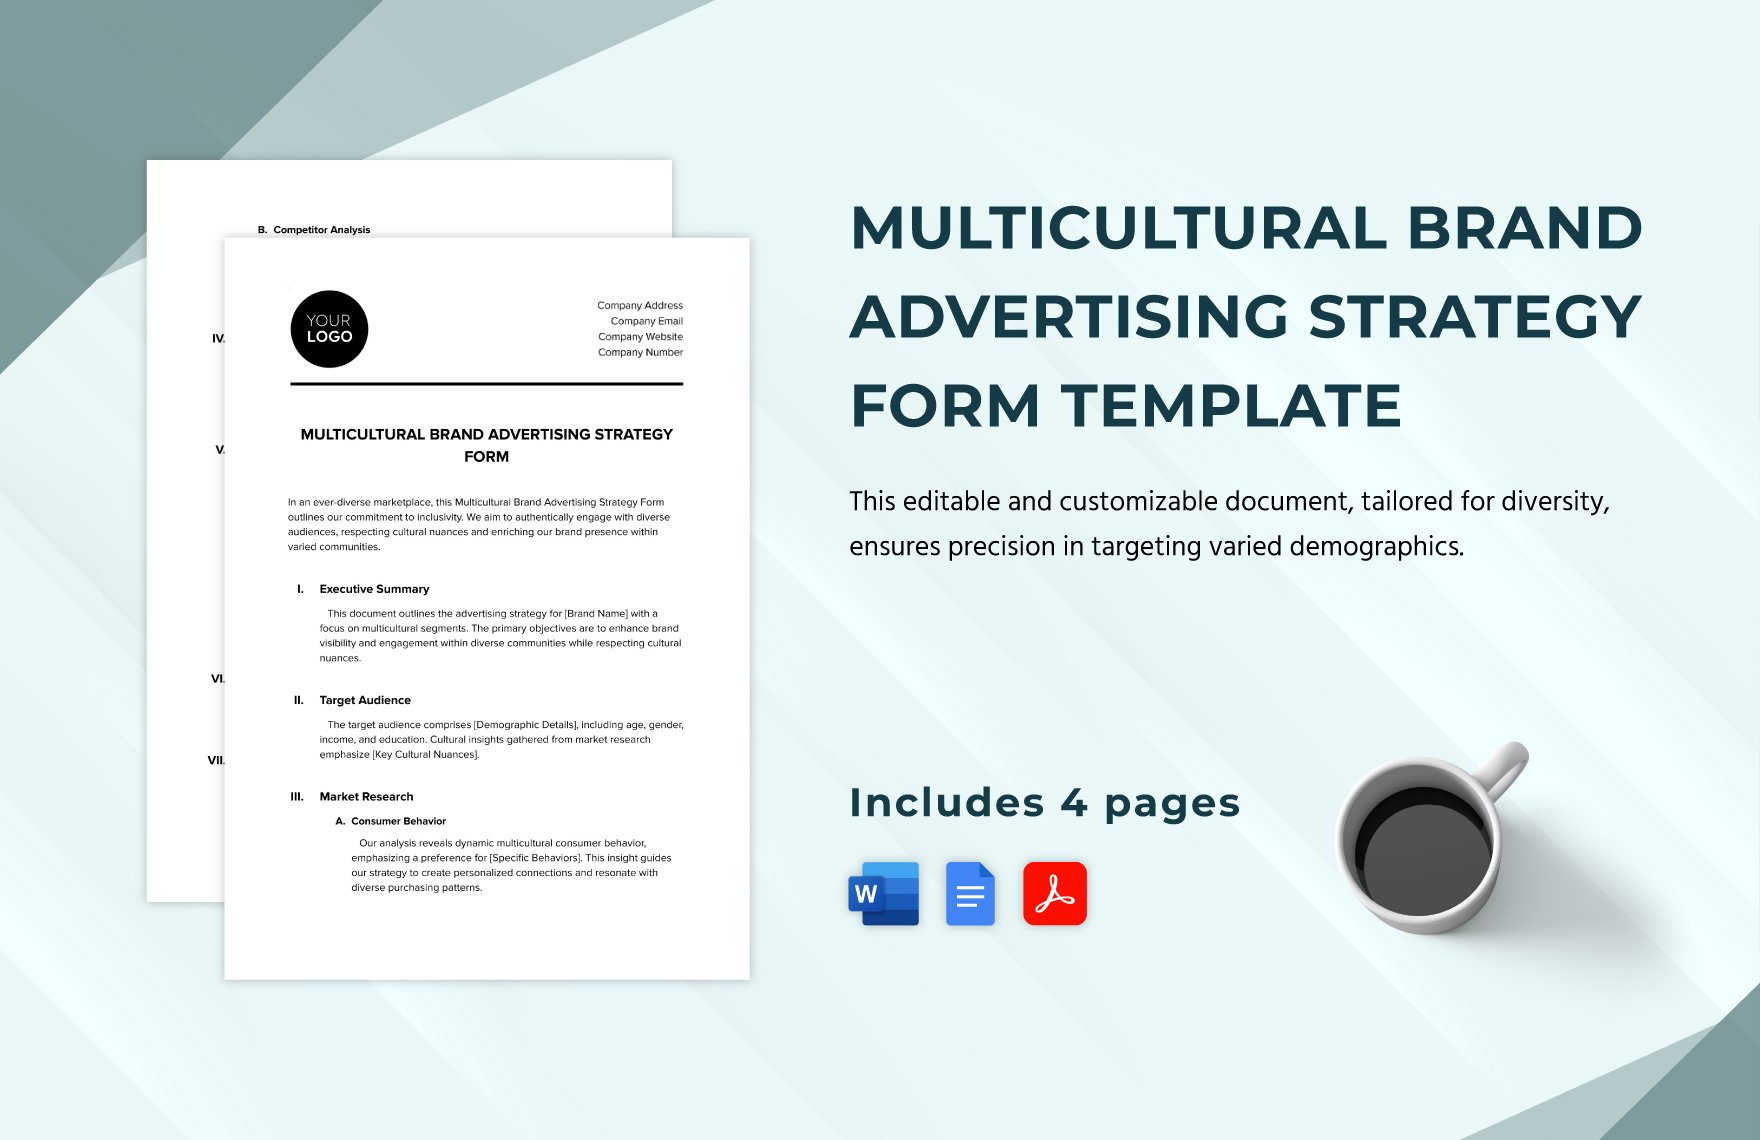 Multicultural Brand Advertising Strategy Form Template in Word, Google Docs, PDF